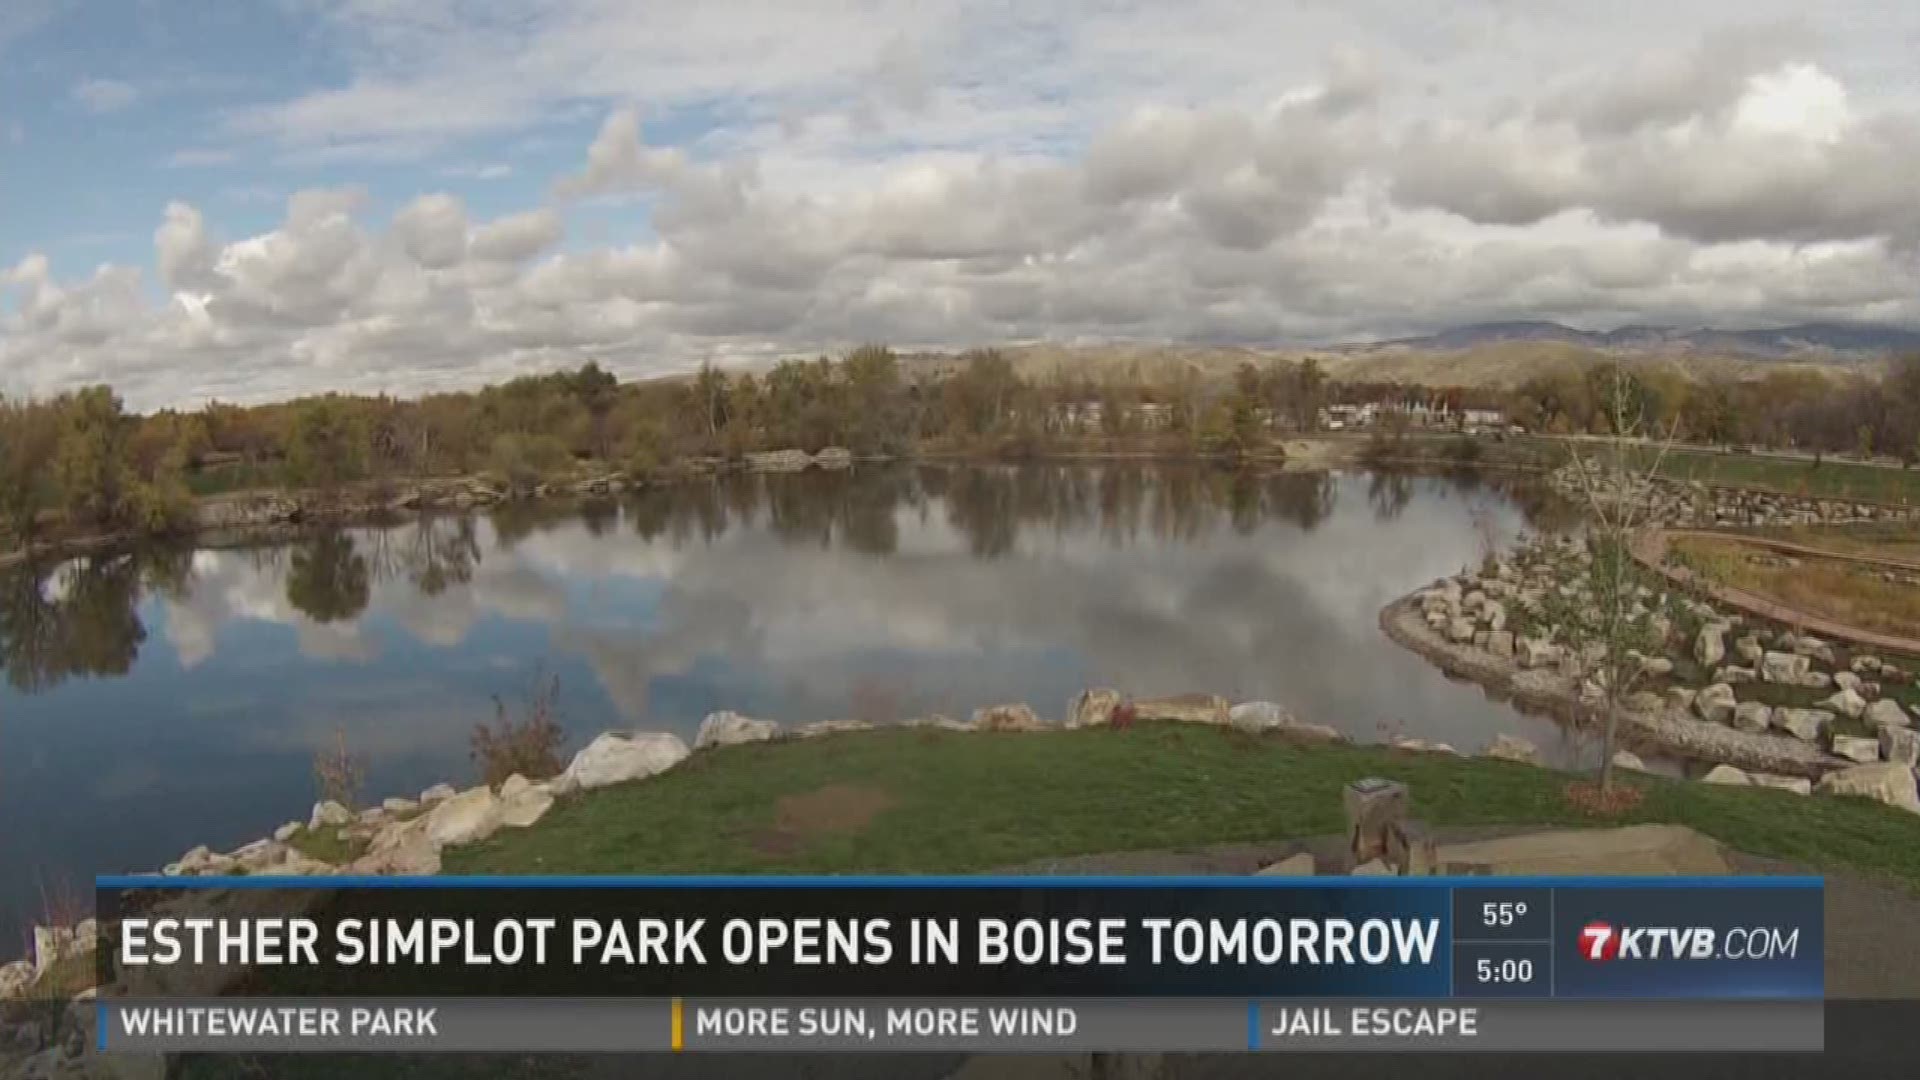 The new Boise park is now complete and will open to public Wednesday.